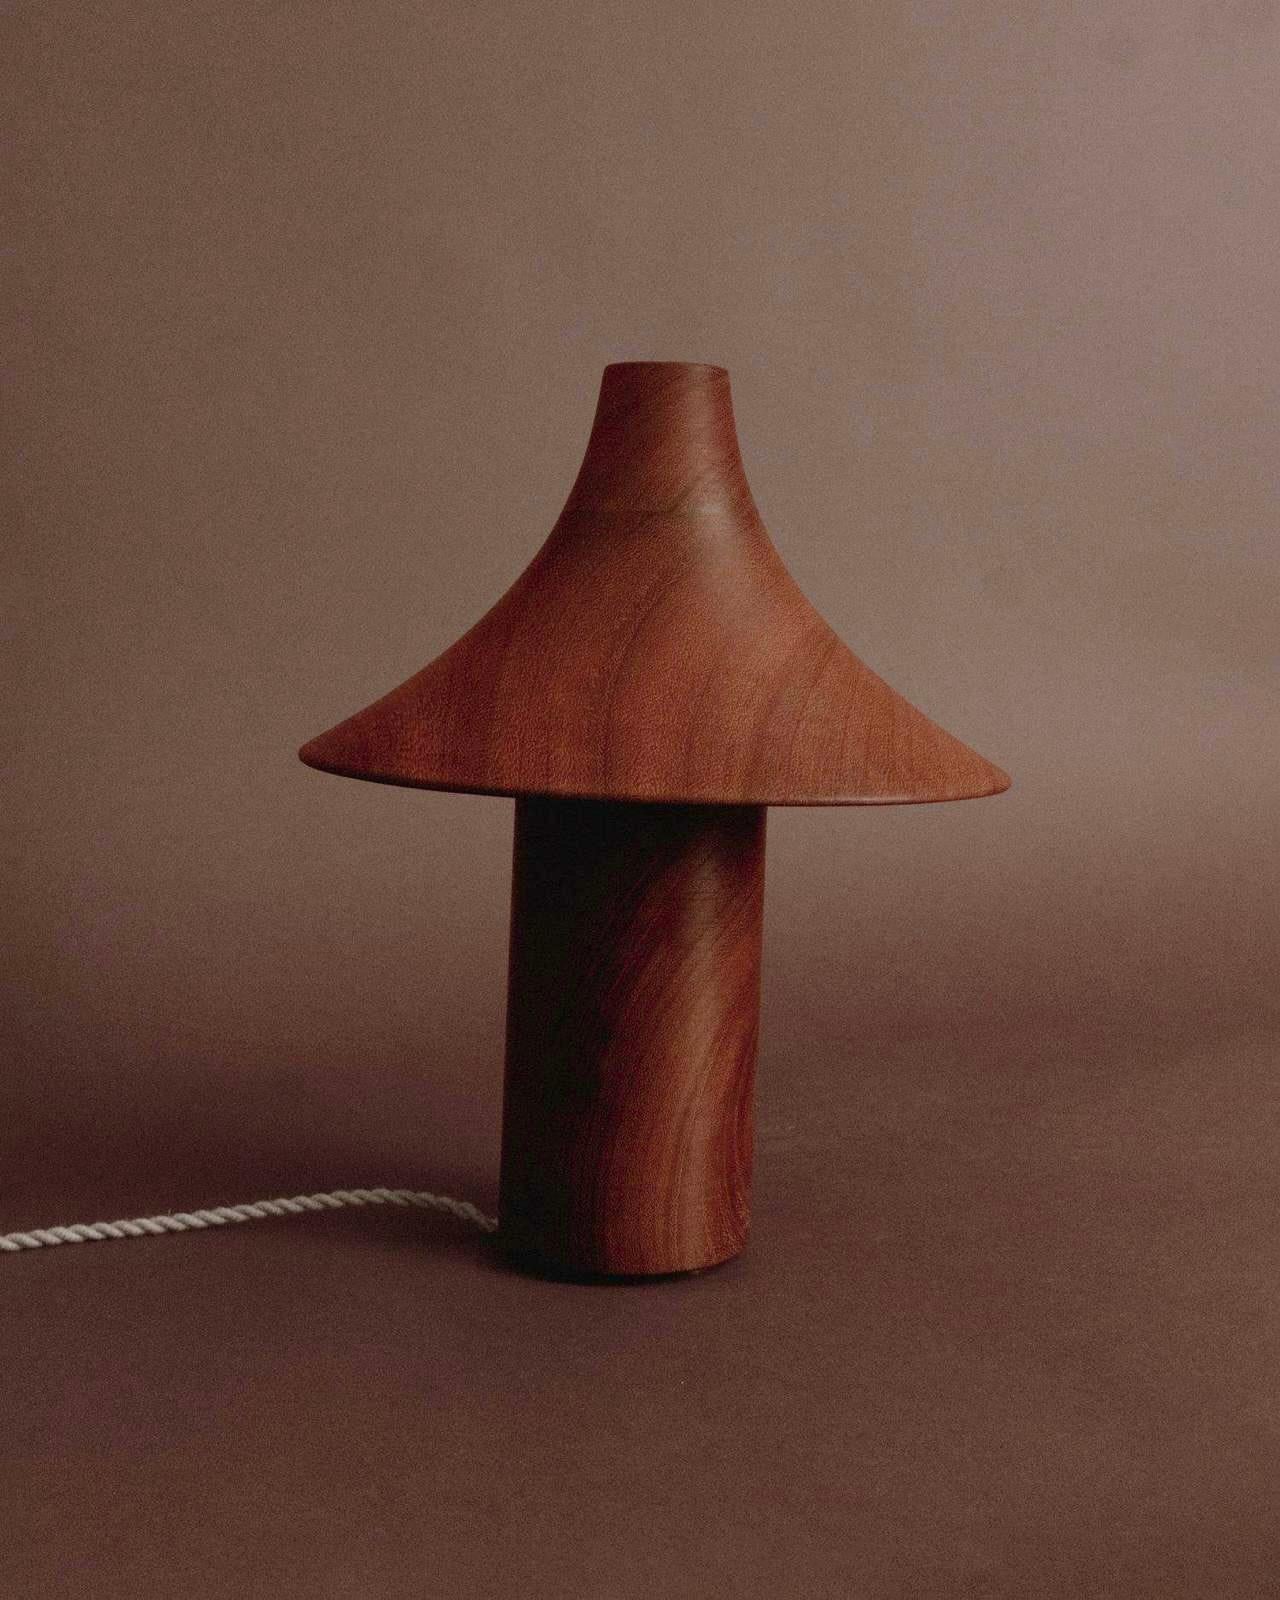 This handmade lamps are one off pieces crafted out of solid wood turned into a traditional lathe operated by expert turner with over 30 years of experience. The tone and direction of the wood's growth rings are like a finger print of each unique